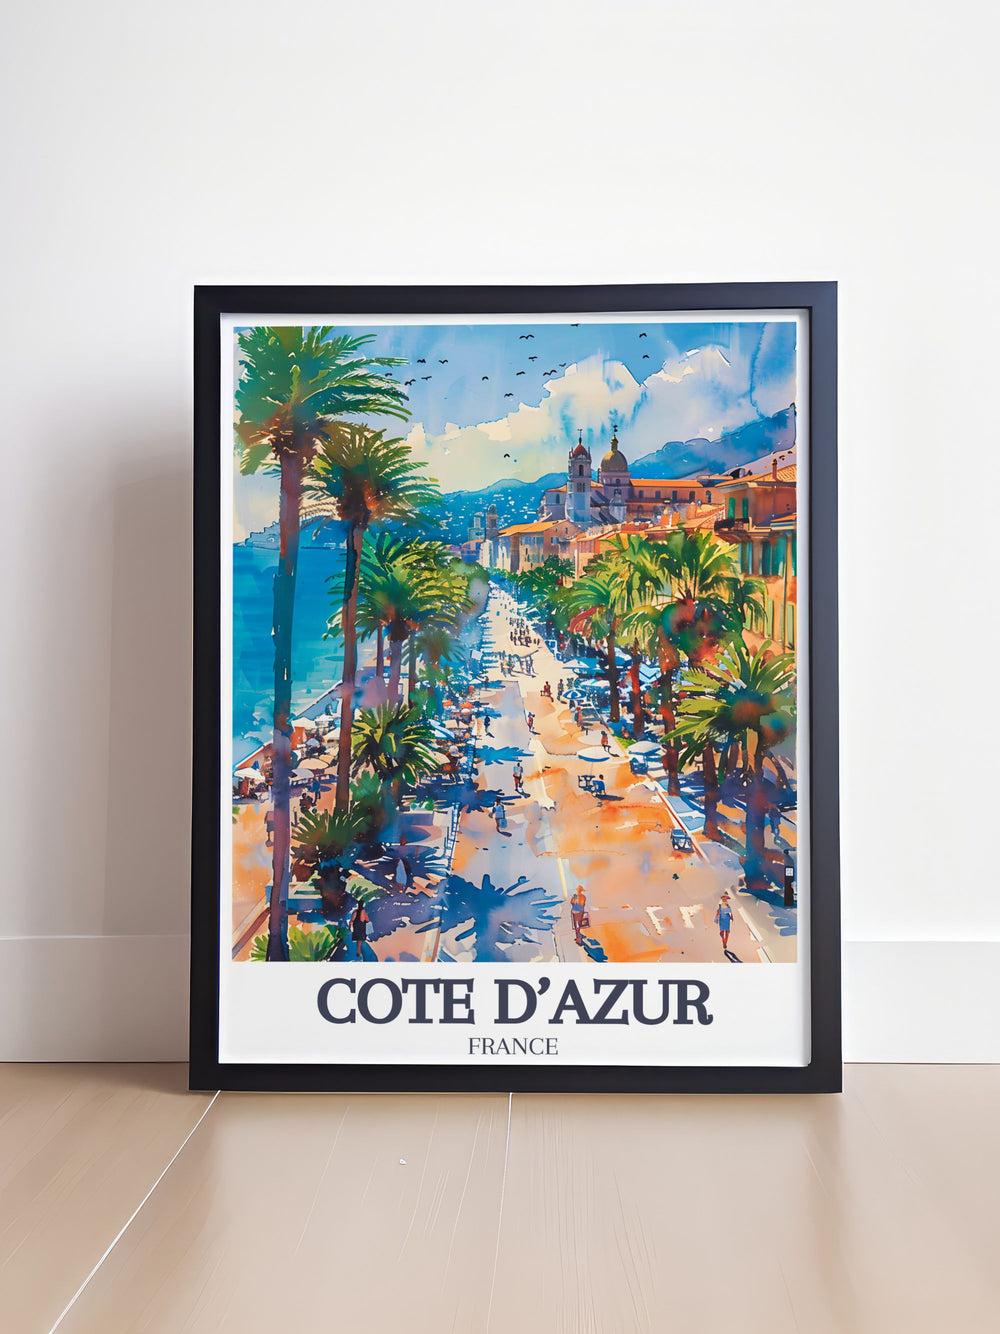 Capture the allure of the French Riviera with a poster featuring the iconic Promenade des Anglais, ideal for enhancing any living space with its timeless elegance and scenic views.